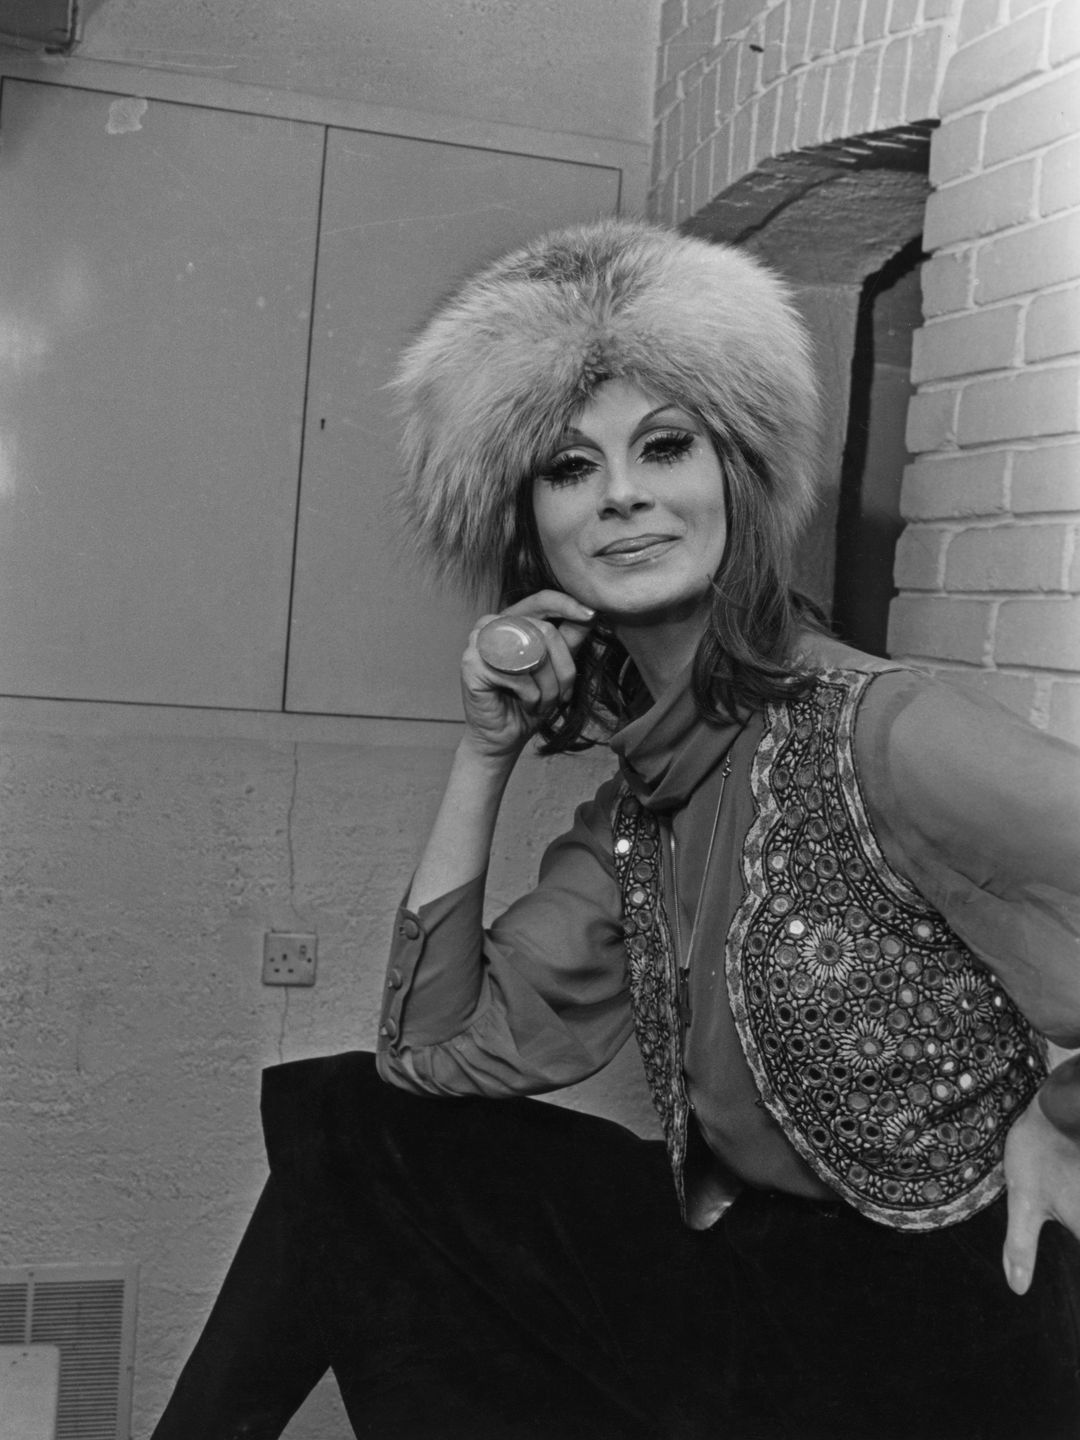 April Ashley wearing a fur hat and embellished waistcoat